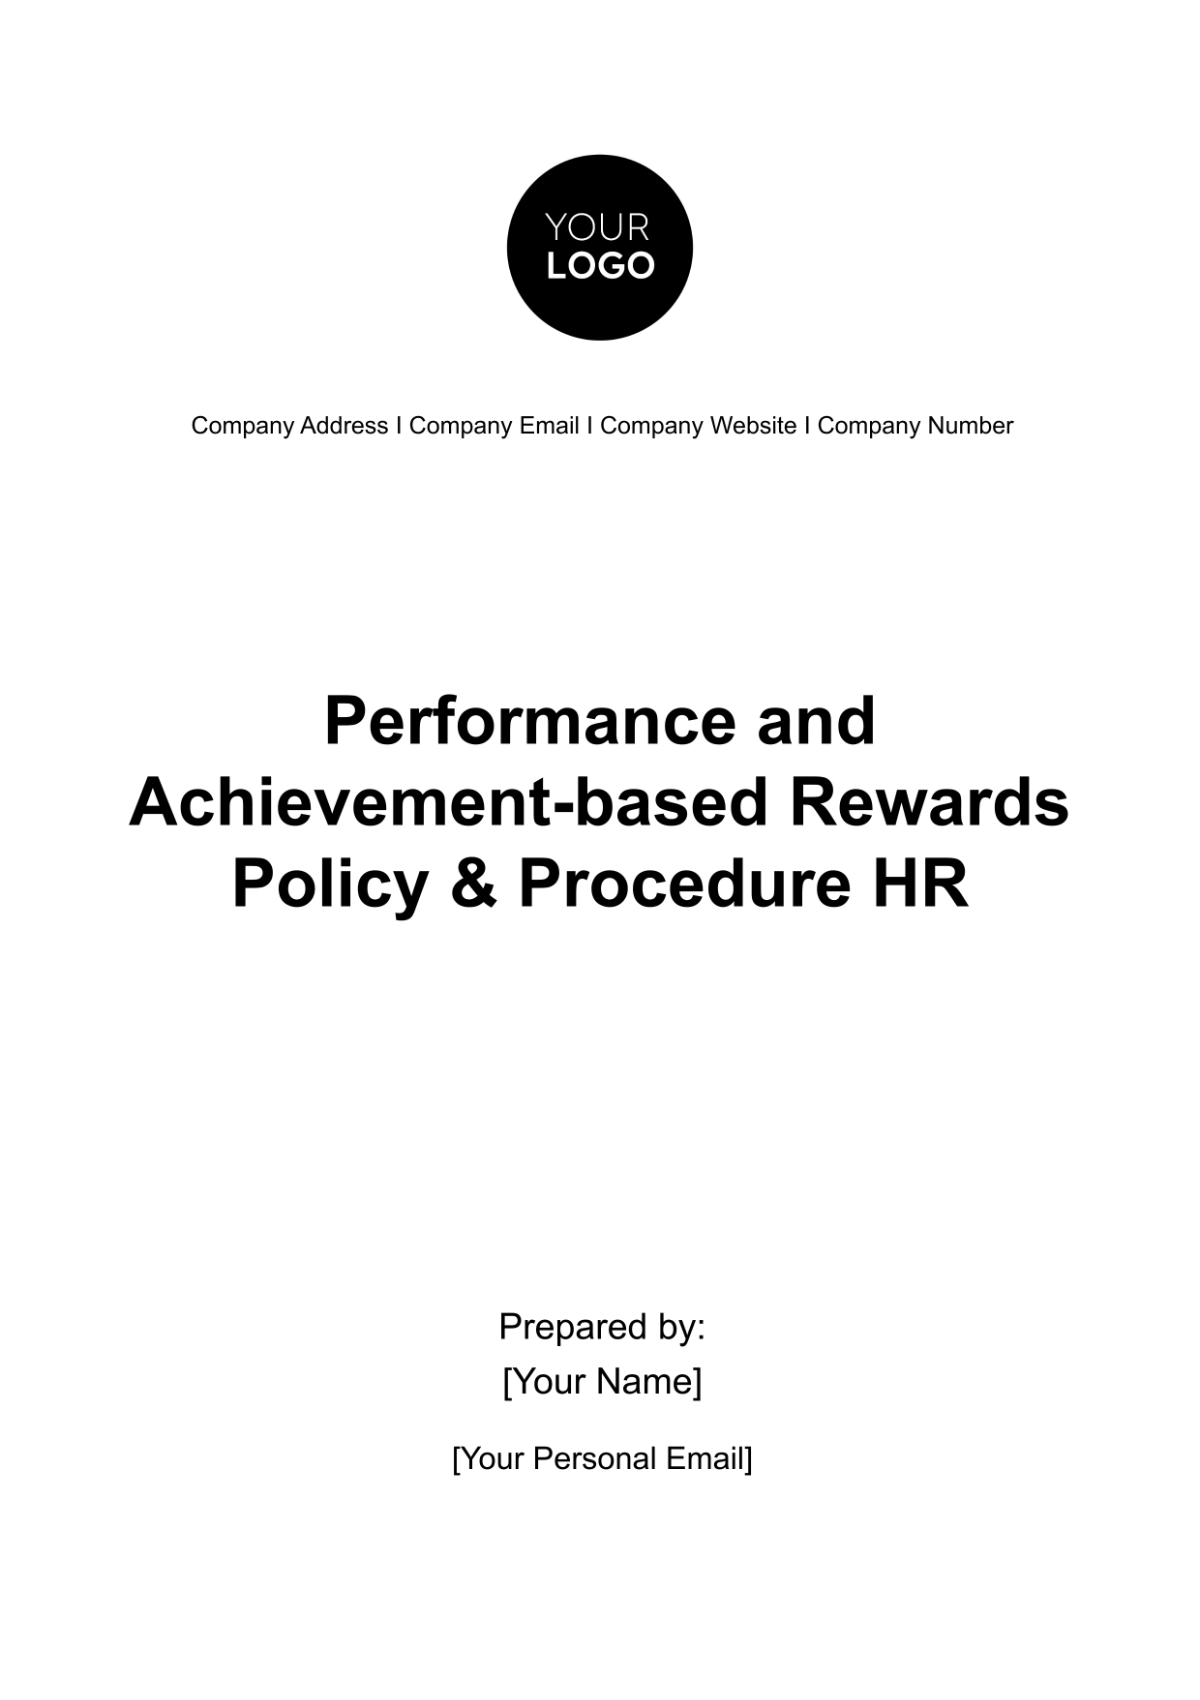 Performance and Achievement-based Rewards Policy & Procedure HR Template